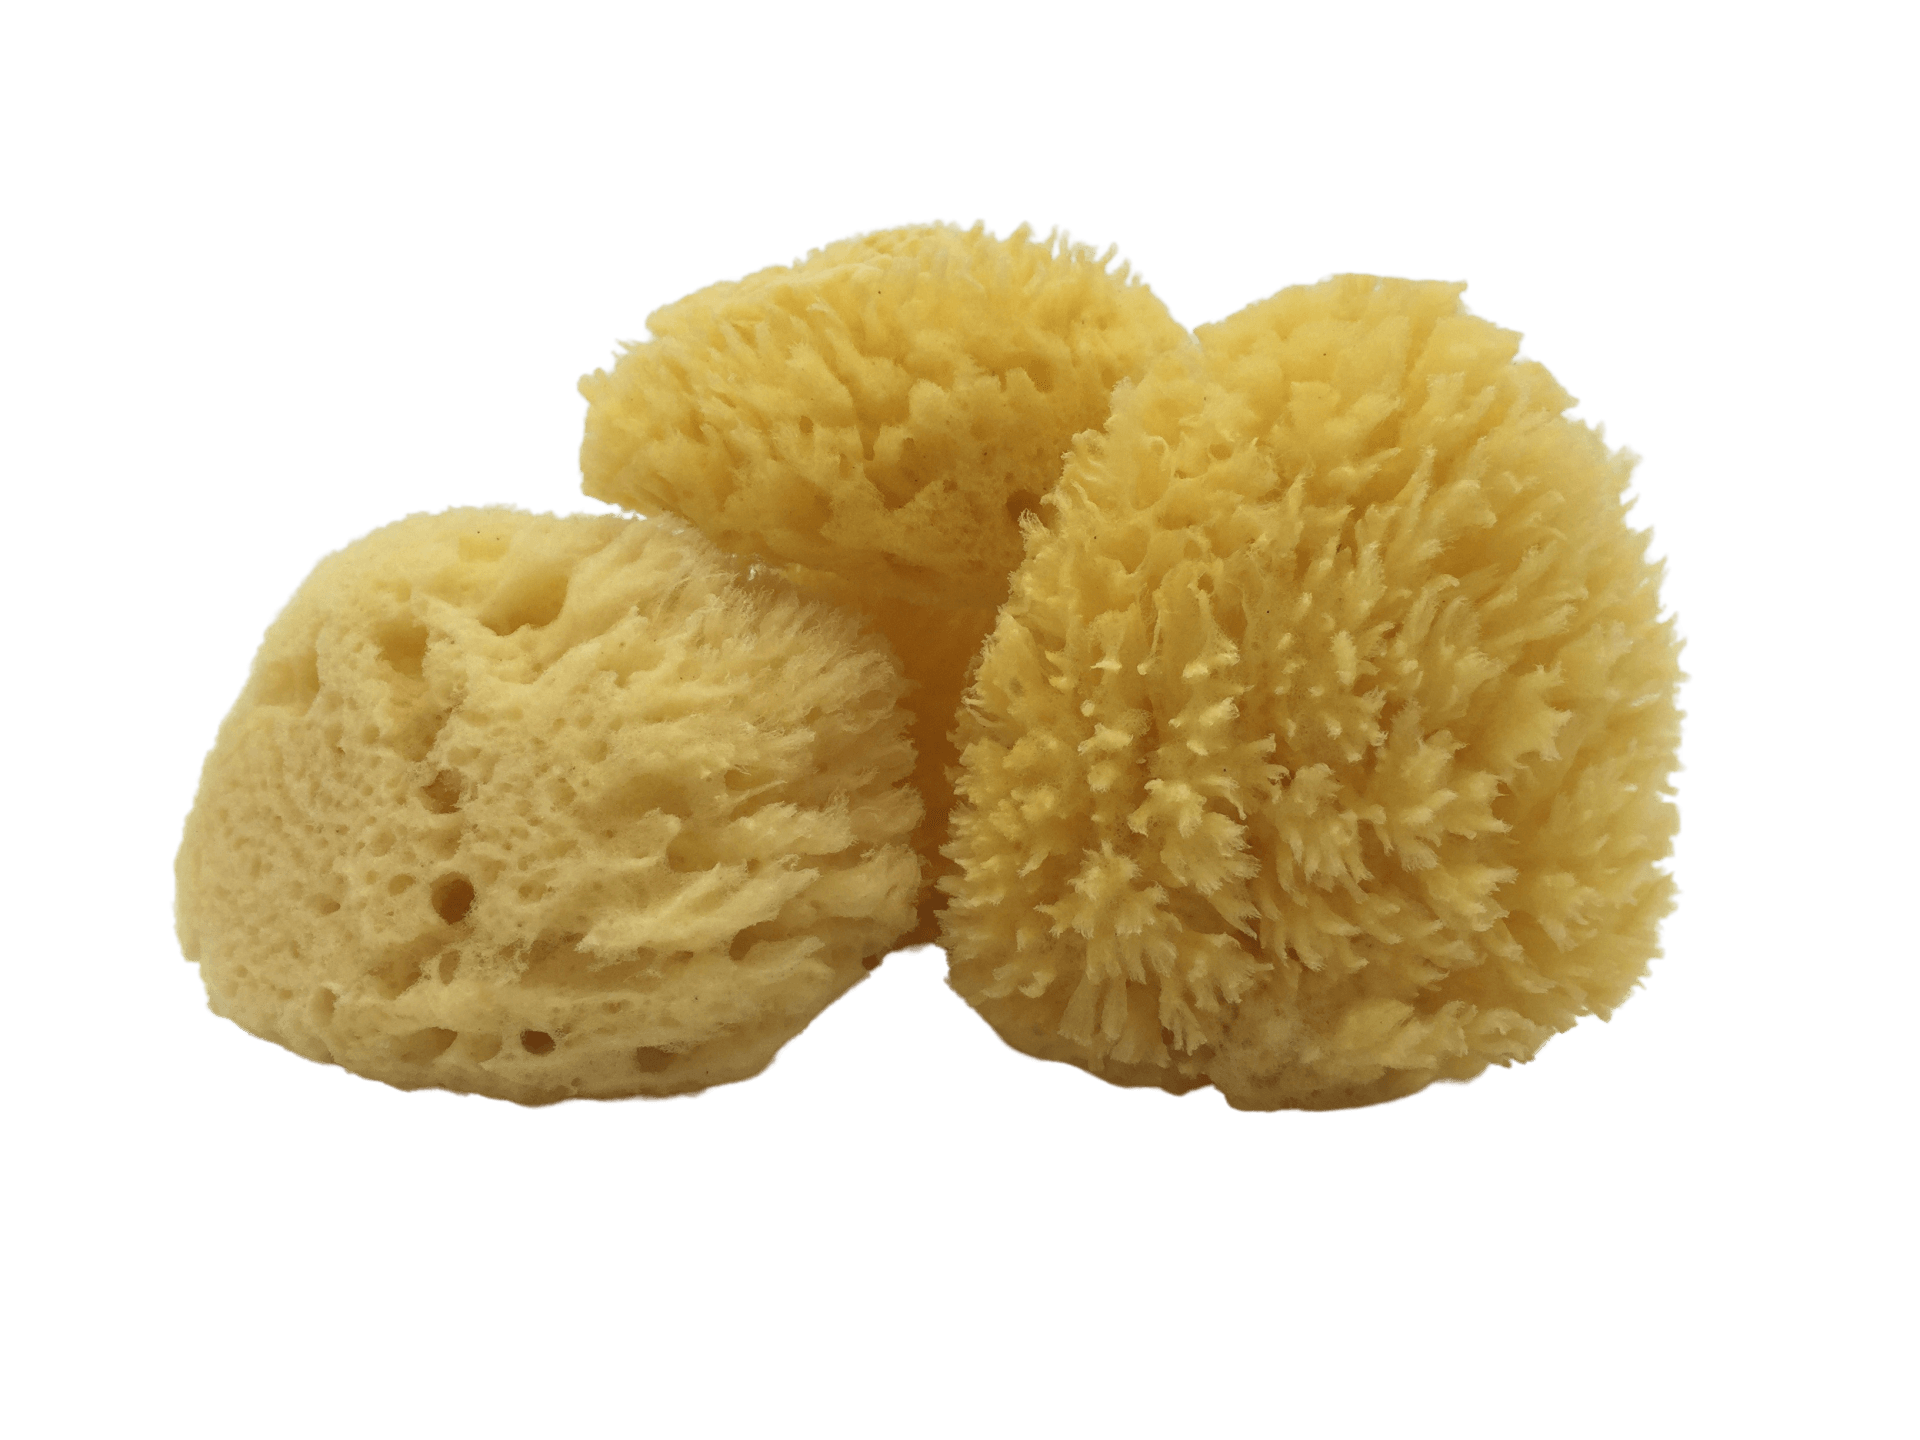 How to Integrate a Sea Sponge into Your Daily Beauty Regimen